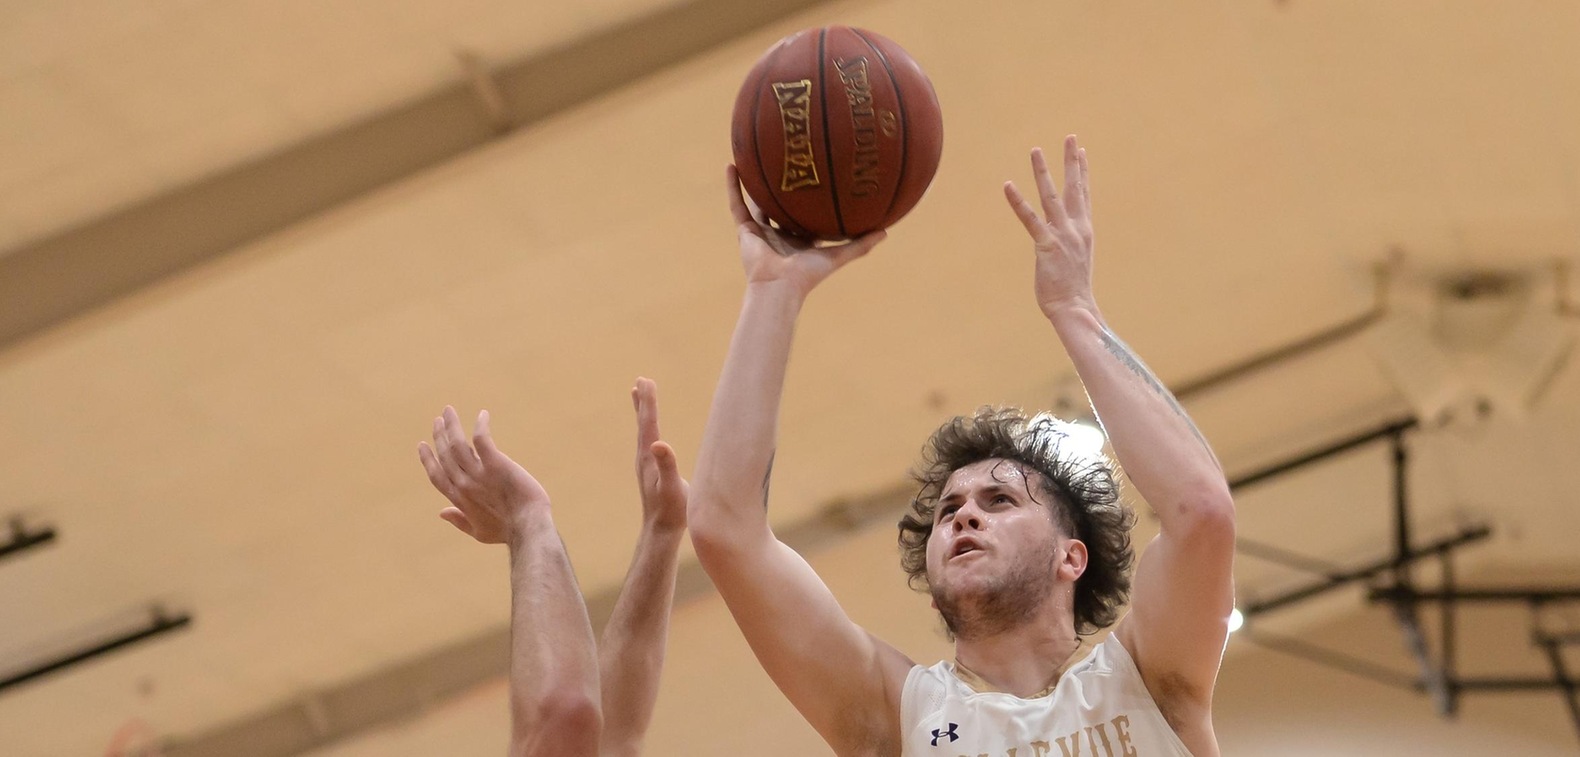 Vinny Belcaster scored a game-high 25 points to lead BU past VCSU and into the NSAA Championship Game.